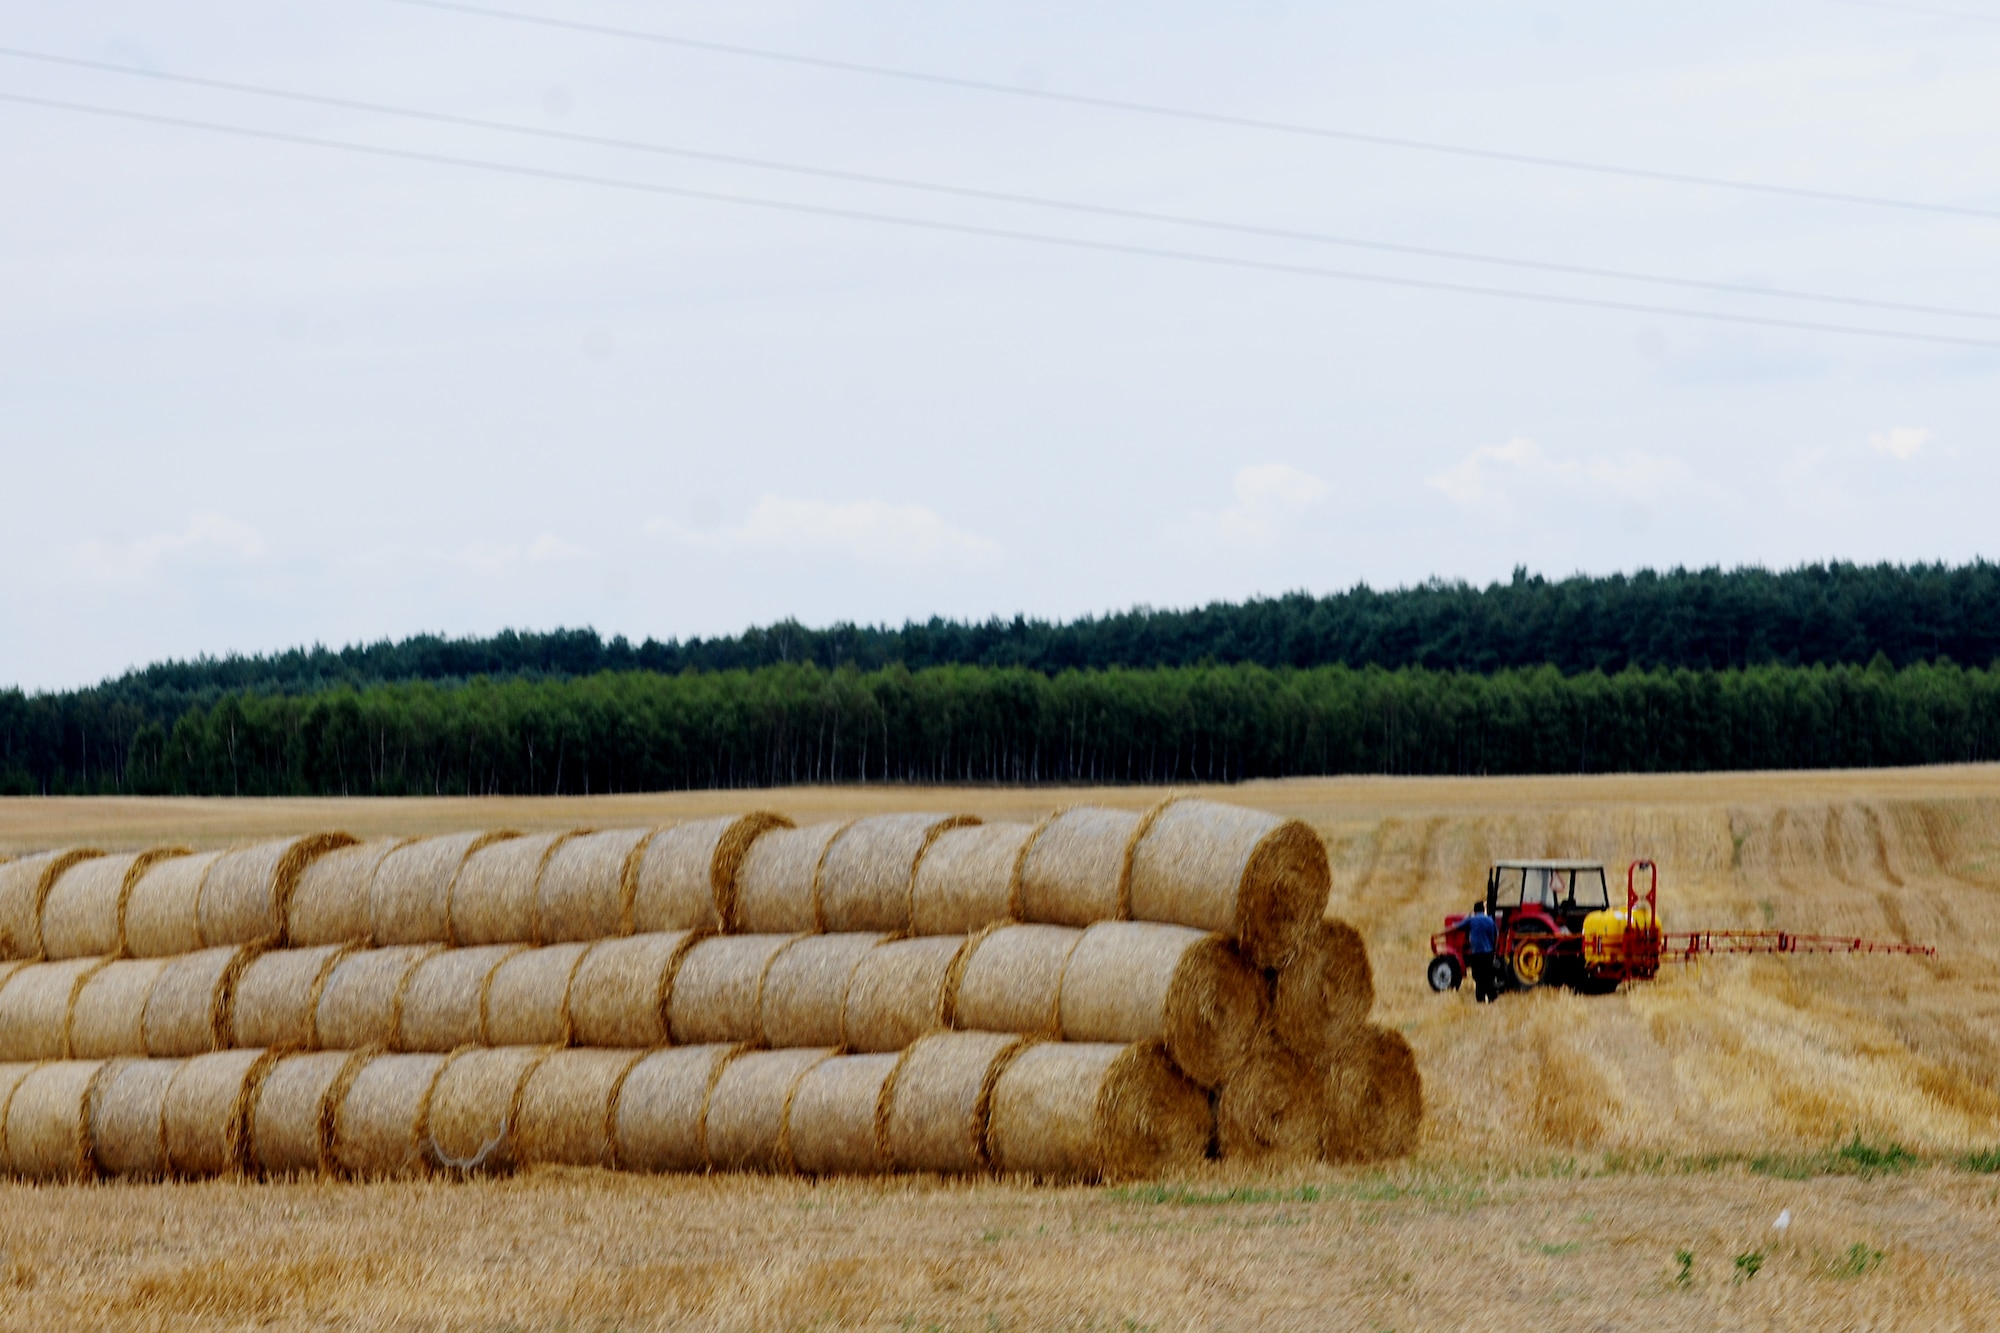 A farmer takes a break from his work and surveys a field along the road to Powidz Air Base, Poland, Aug. 1, 2014. The deployment of two C-130J Super Hercules aircraft from Ramstein Air Base, Germany, have been well-received by the Polish people. (U.S. Air Force photo by Staff Sgt. Jarad A. Denton/Released)